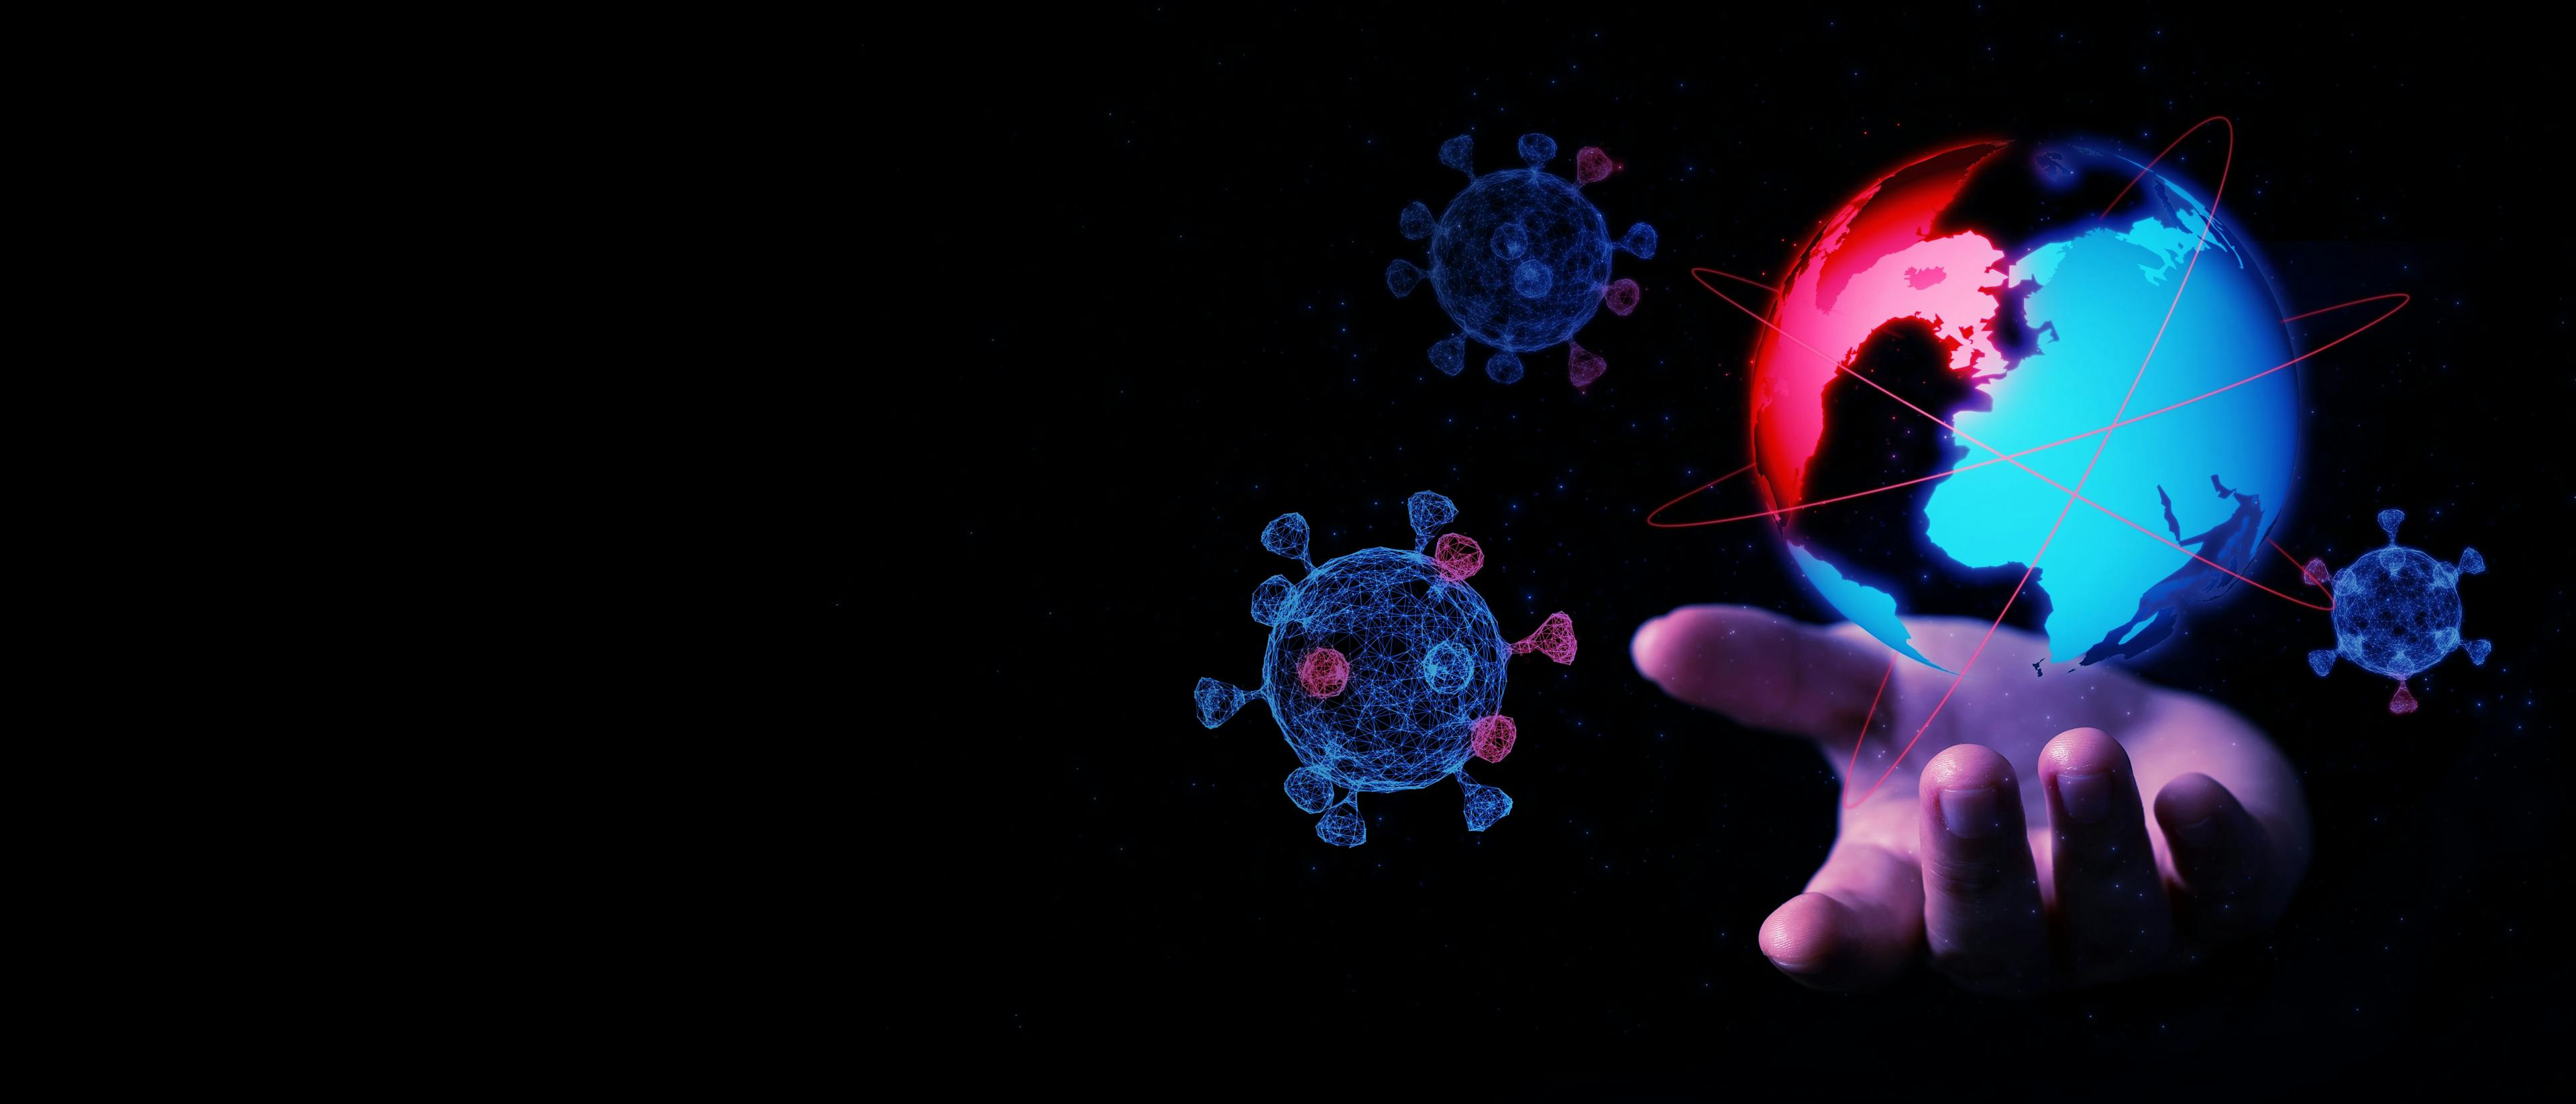 Globe in hand with Covid-19 virus in background | Image credit: Chan2545